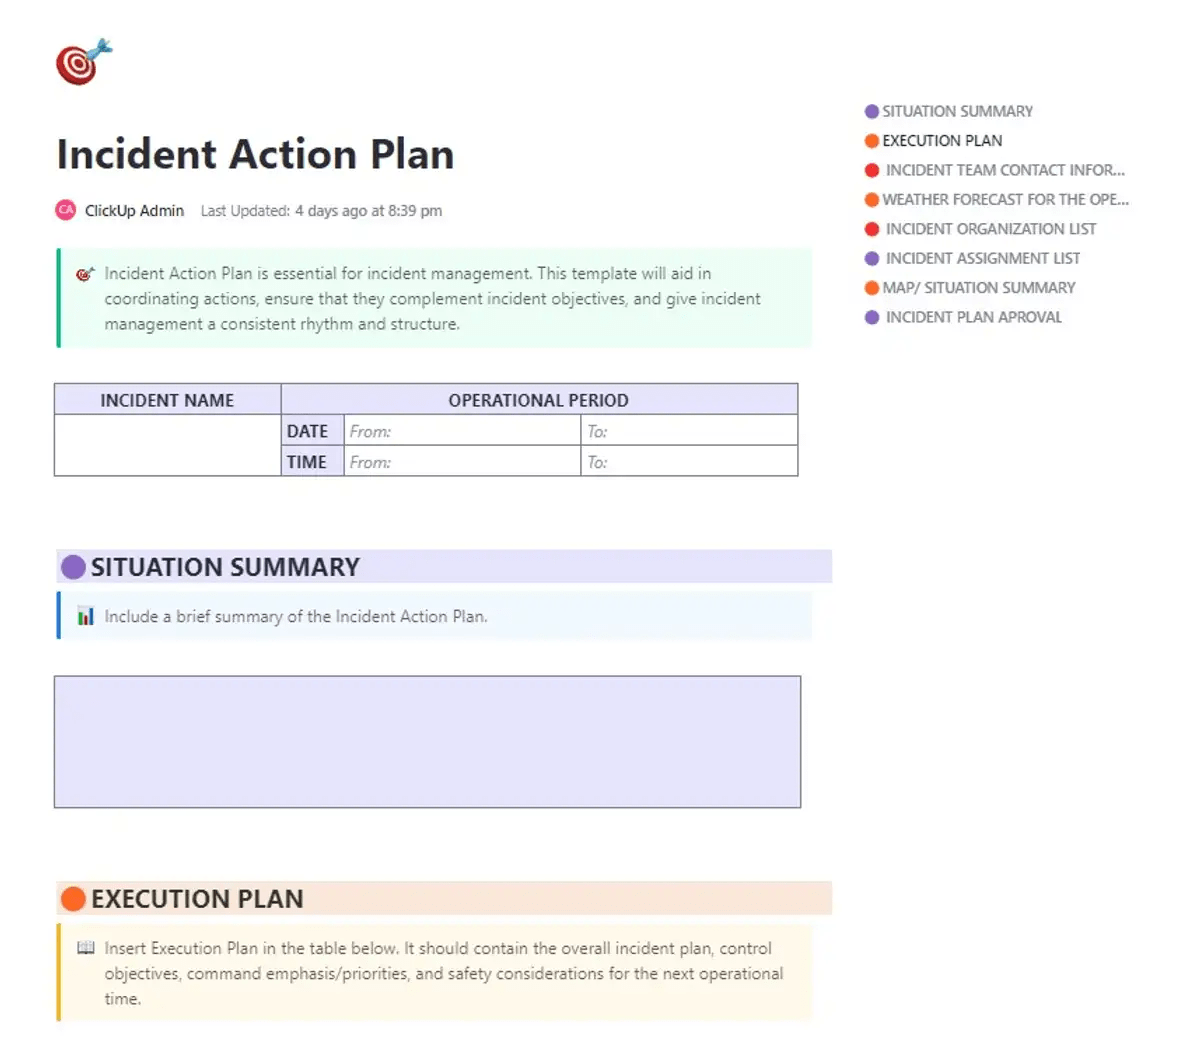 Coordinate actions, ensure that they complement incident objectives, and give incident management a structure with the ClickUp Incident Action Plan Template